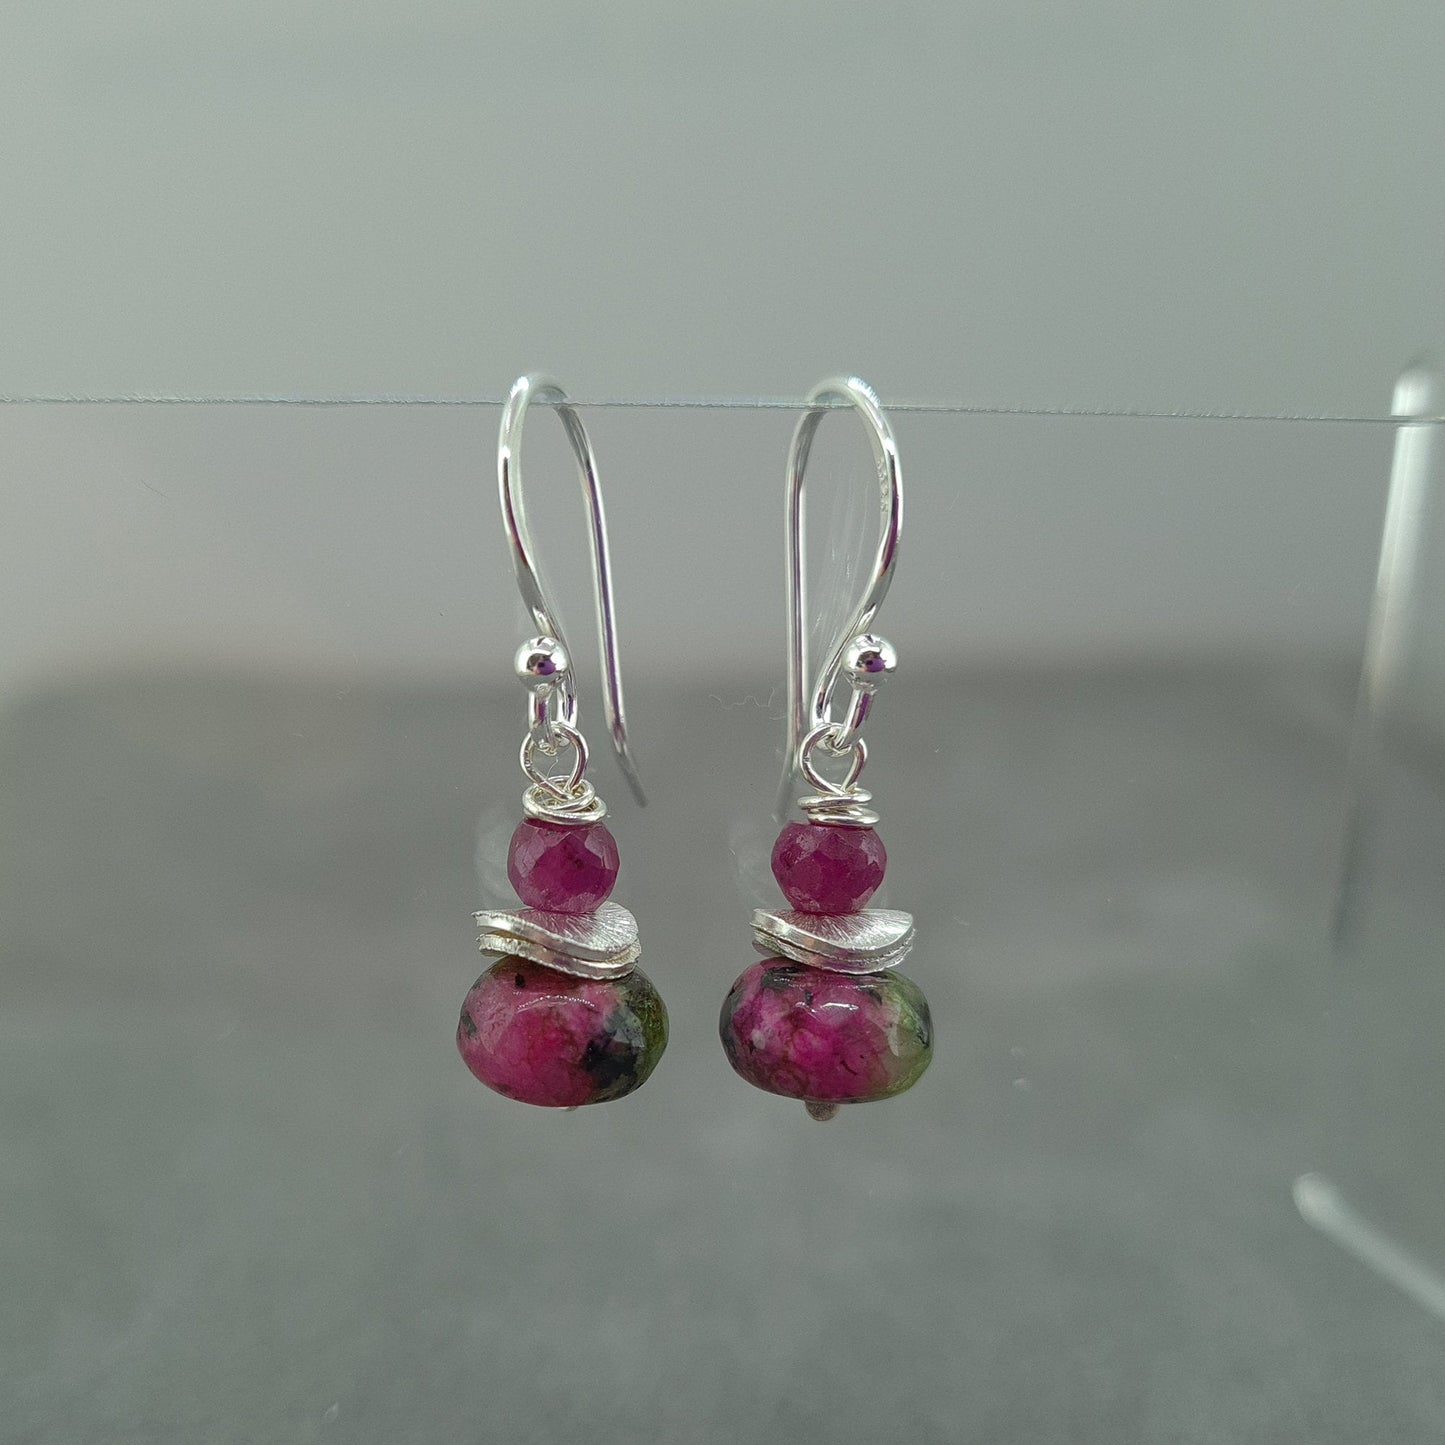 Ruby in Zoisite and Ruby Silver Drop earrings | Birthstone Jewelry | Cancer Zodiac Gift Idea